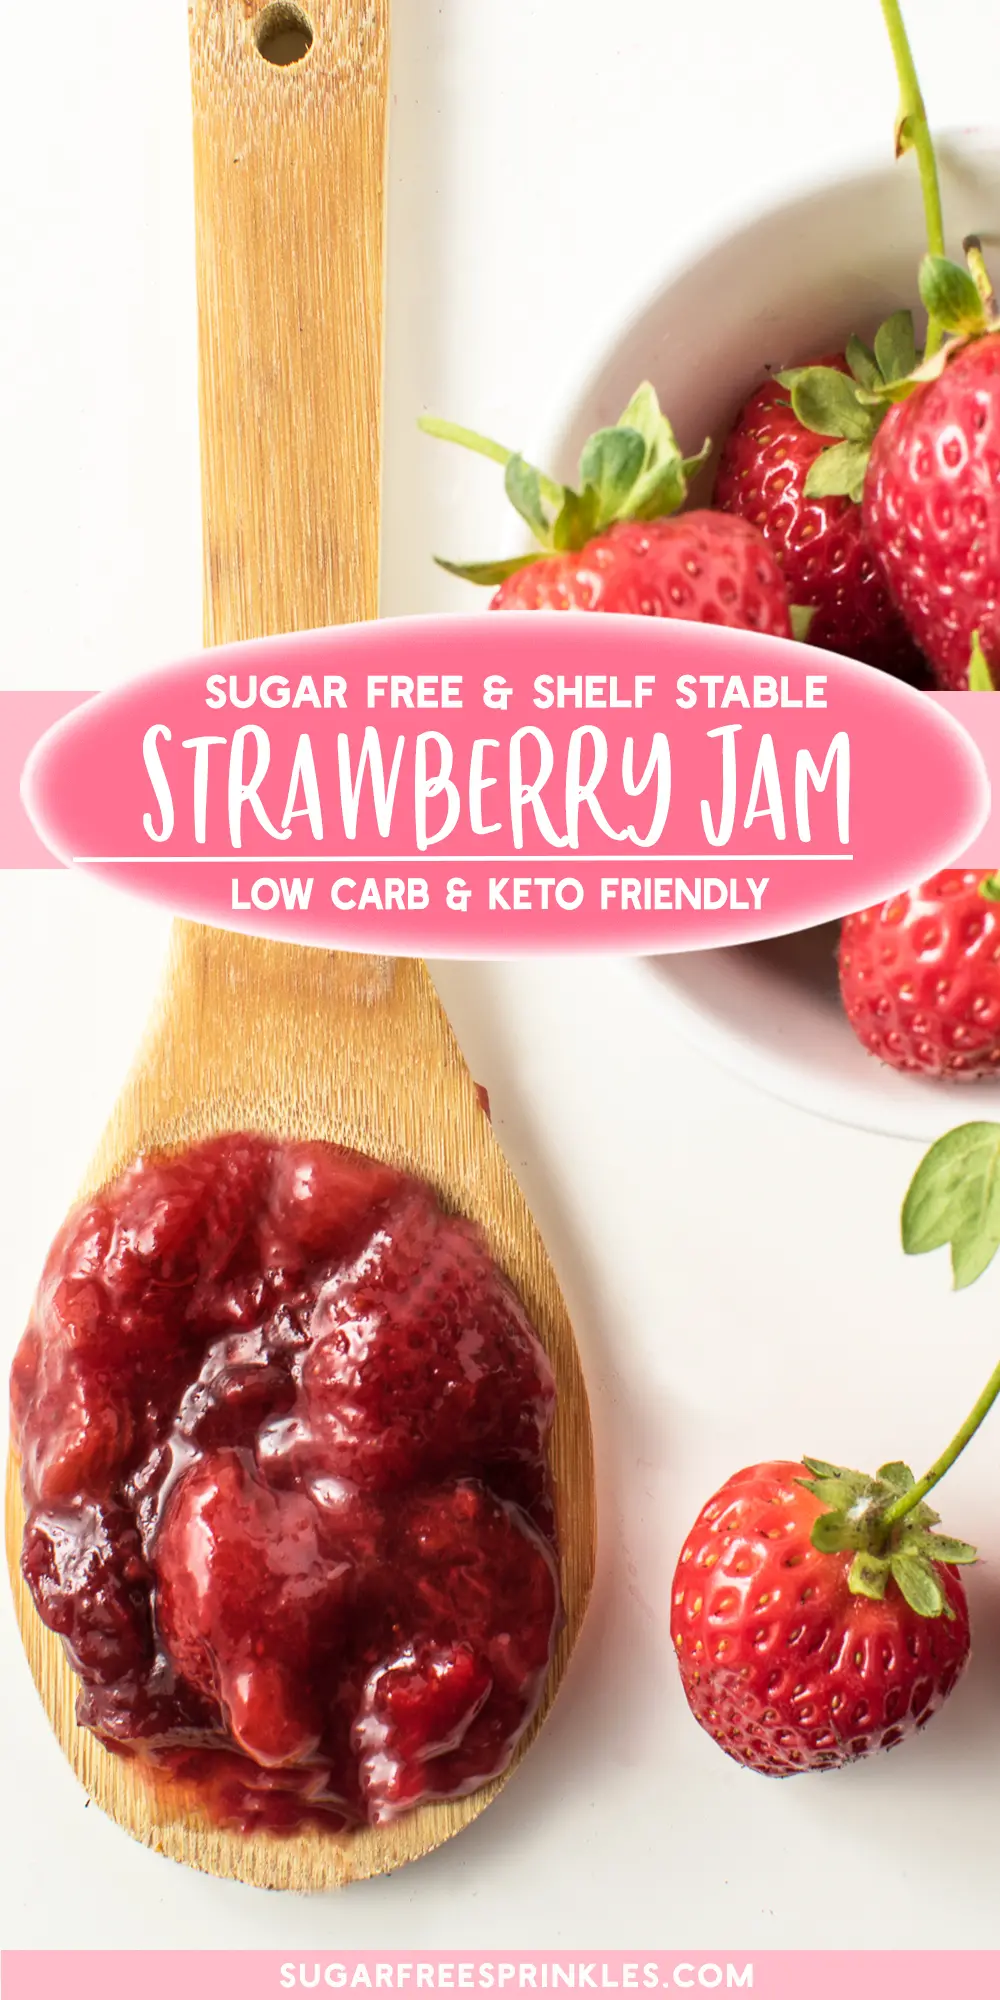 A Tasty and Safe Way to Can Strawberry Jam: Using a Presto Digital